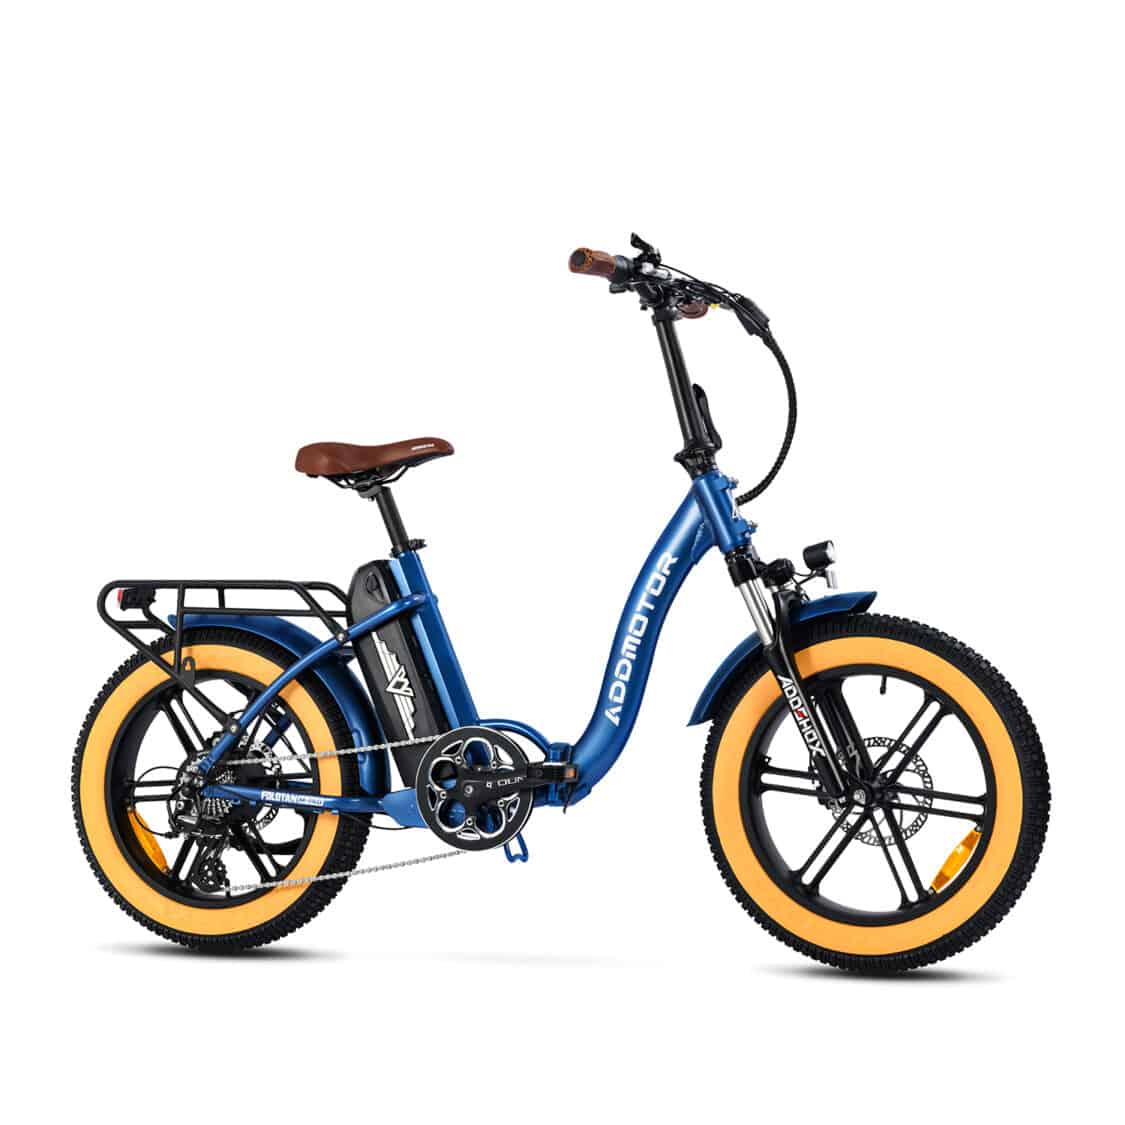 Photo of Addmotor Foldtan M-140 foldable fat tire electric bike with blue frame and yellow tires.